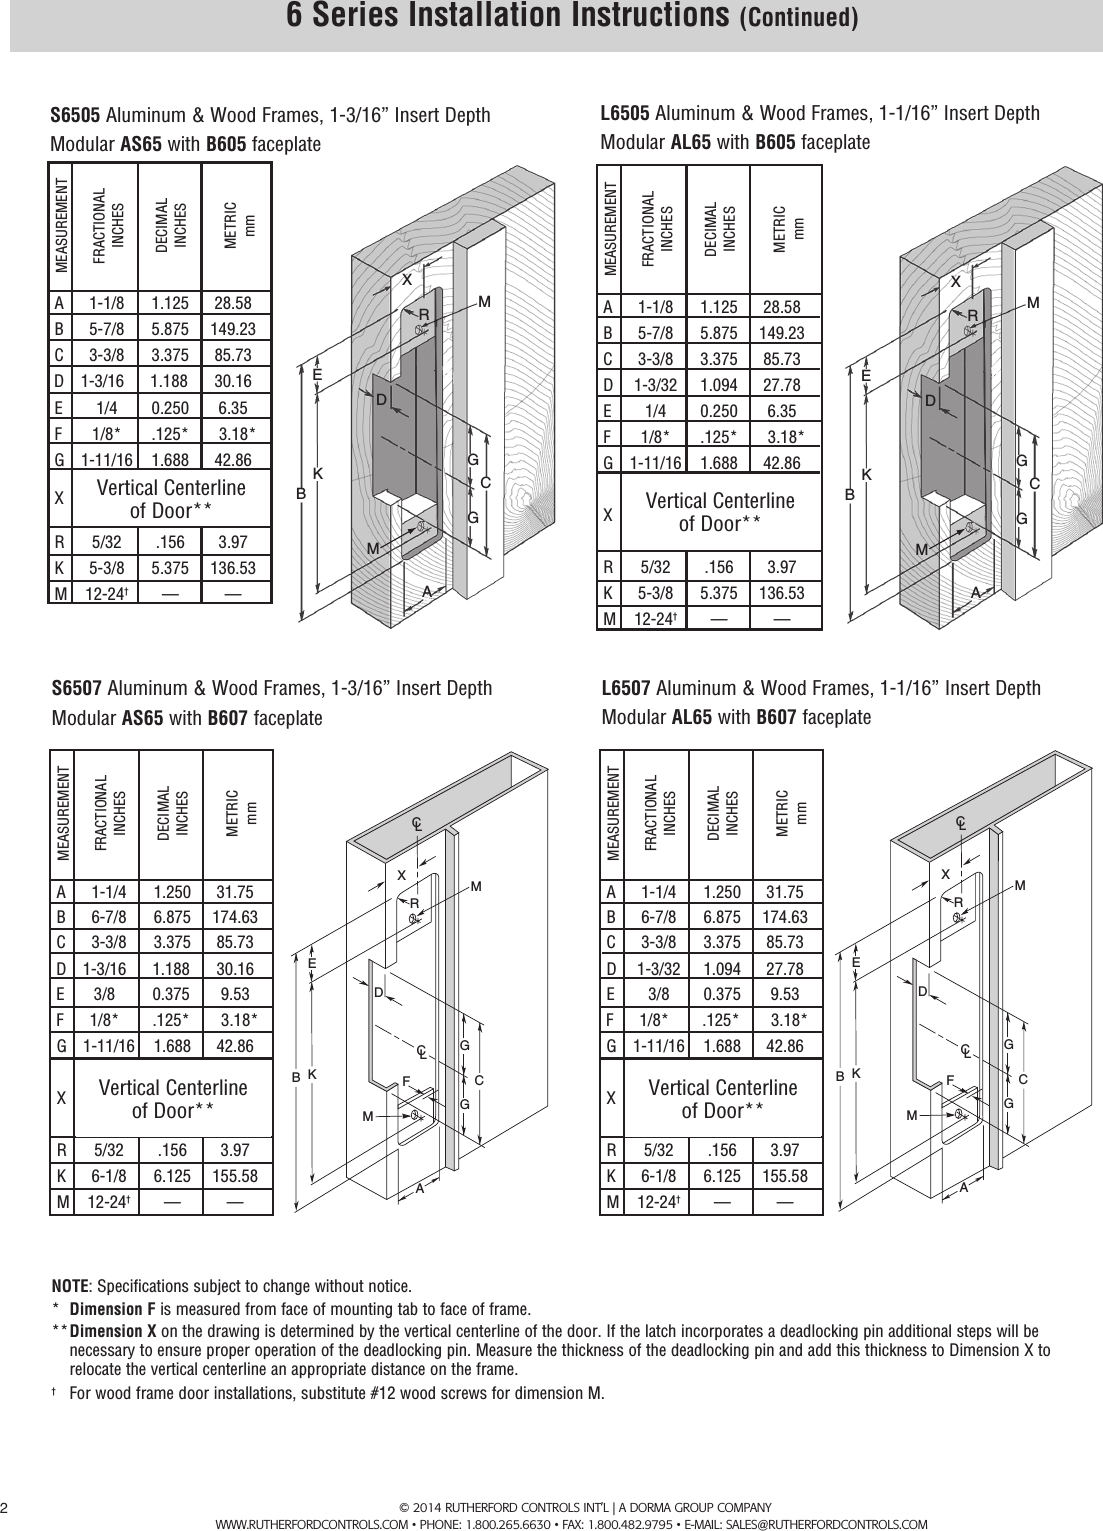 Page 2 of 6 - RCI  6 Series/7 Series Installation Instructions IS6A R0614